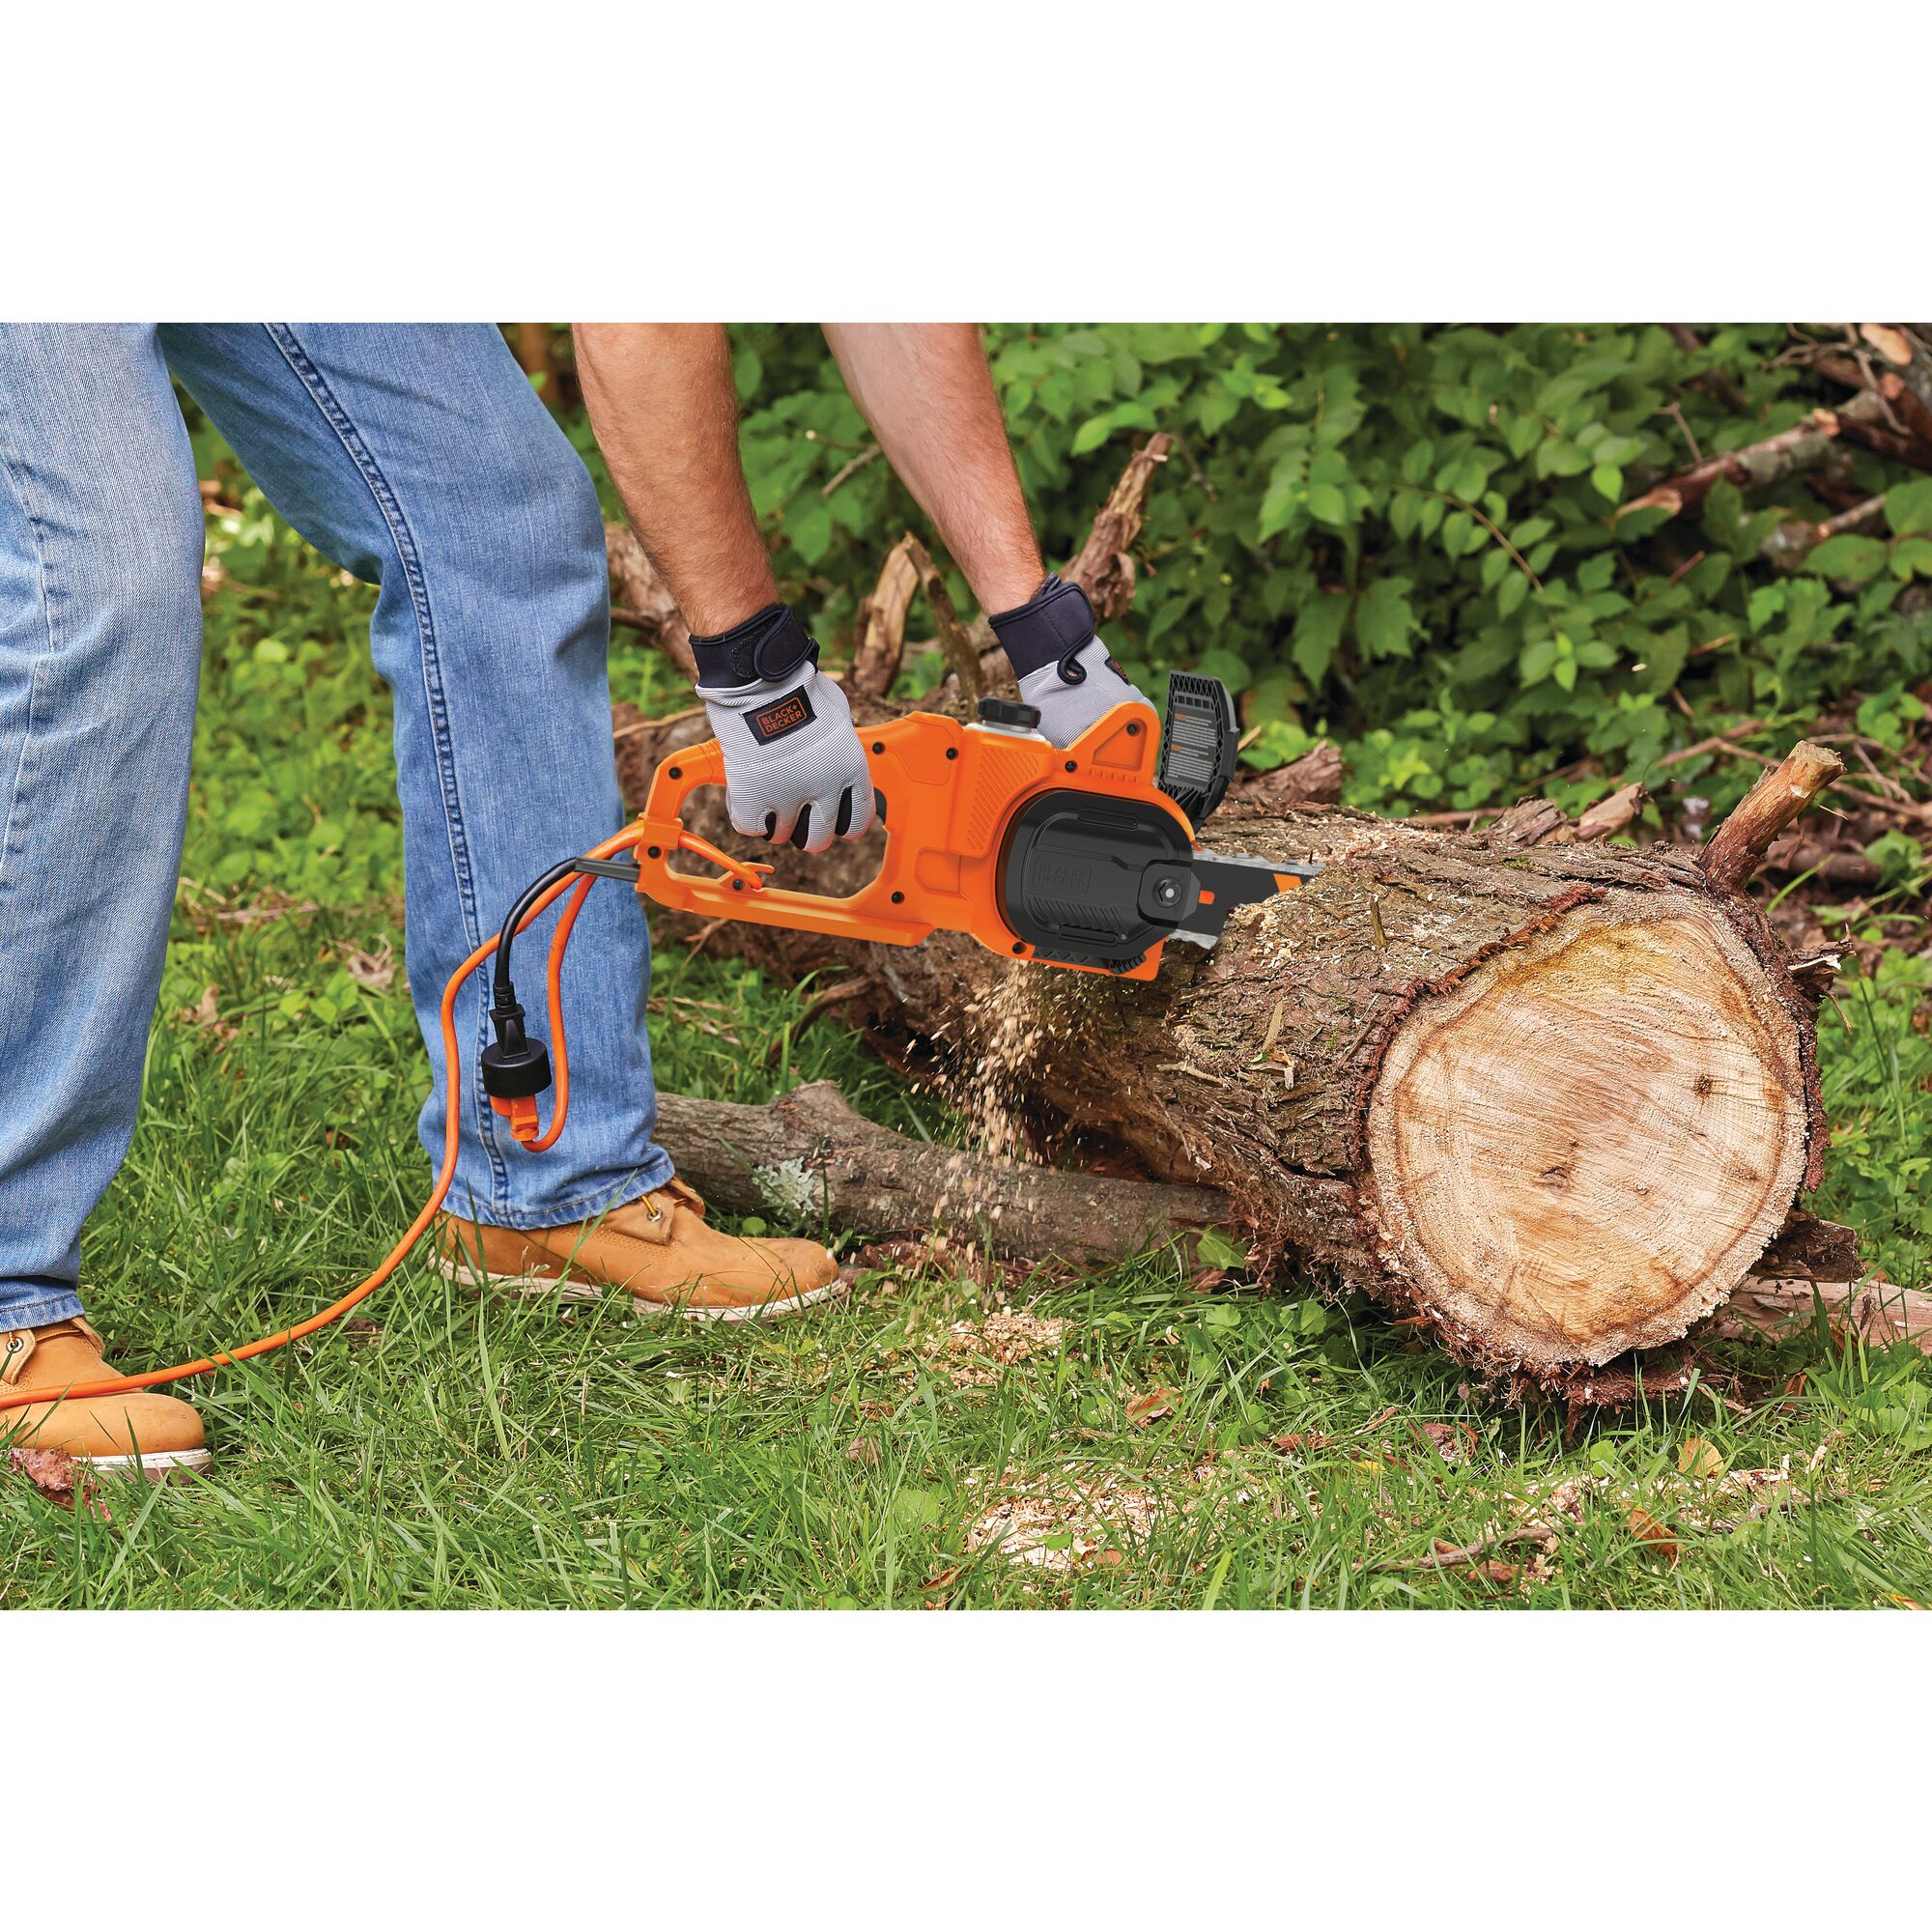 8 Amp 14 inch Electric Chainsaw being used for cutting tree trunk.